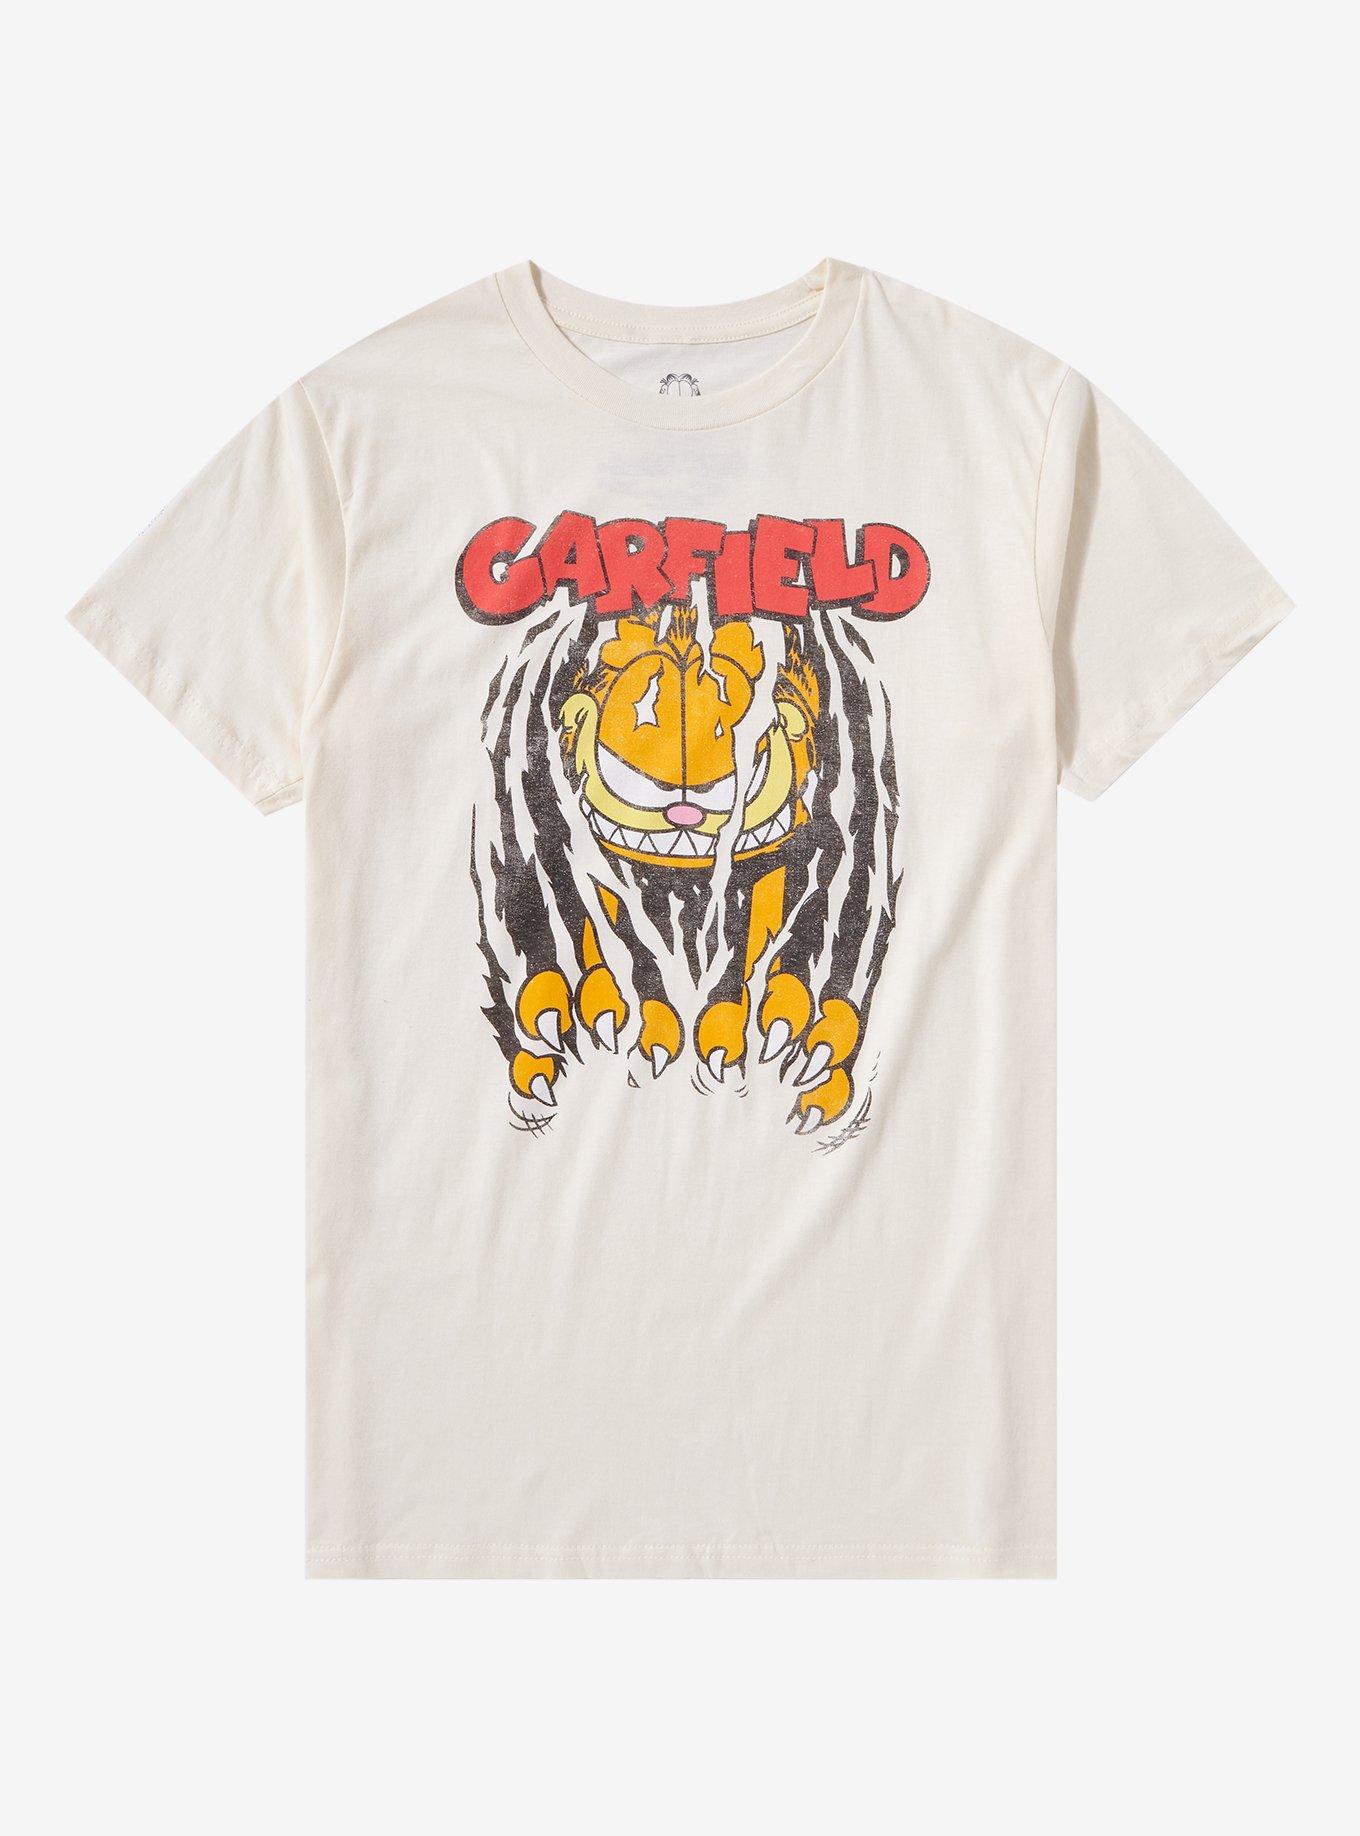 Garfield Claws Out T-Shirt, BEIGE, hi-res